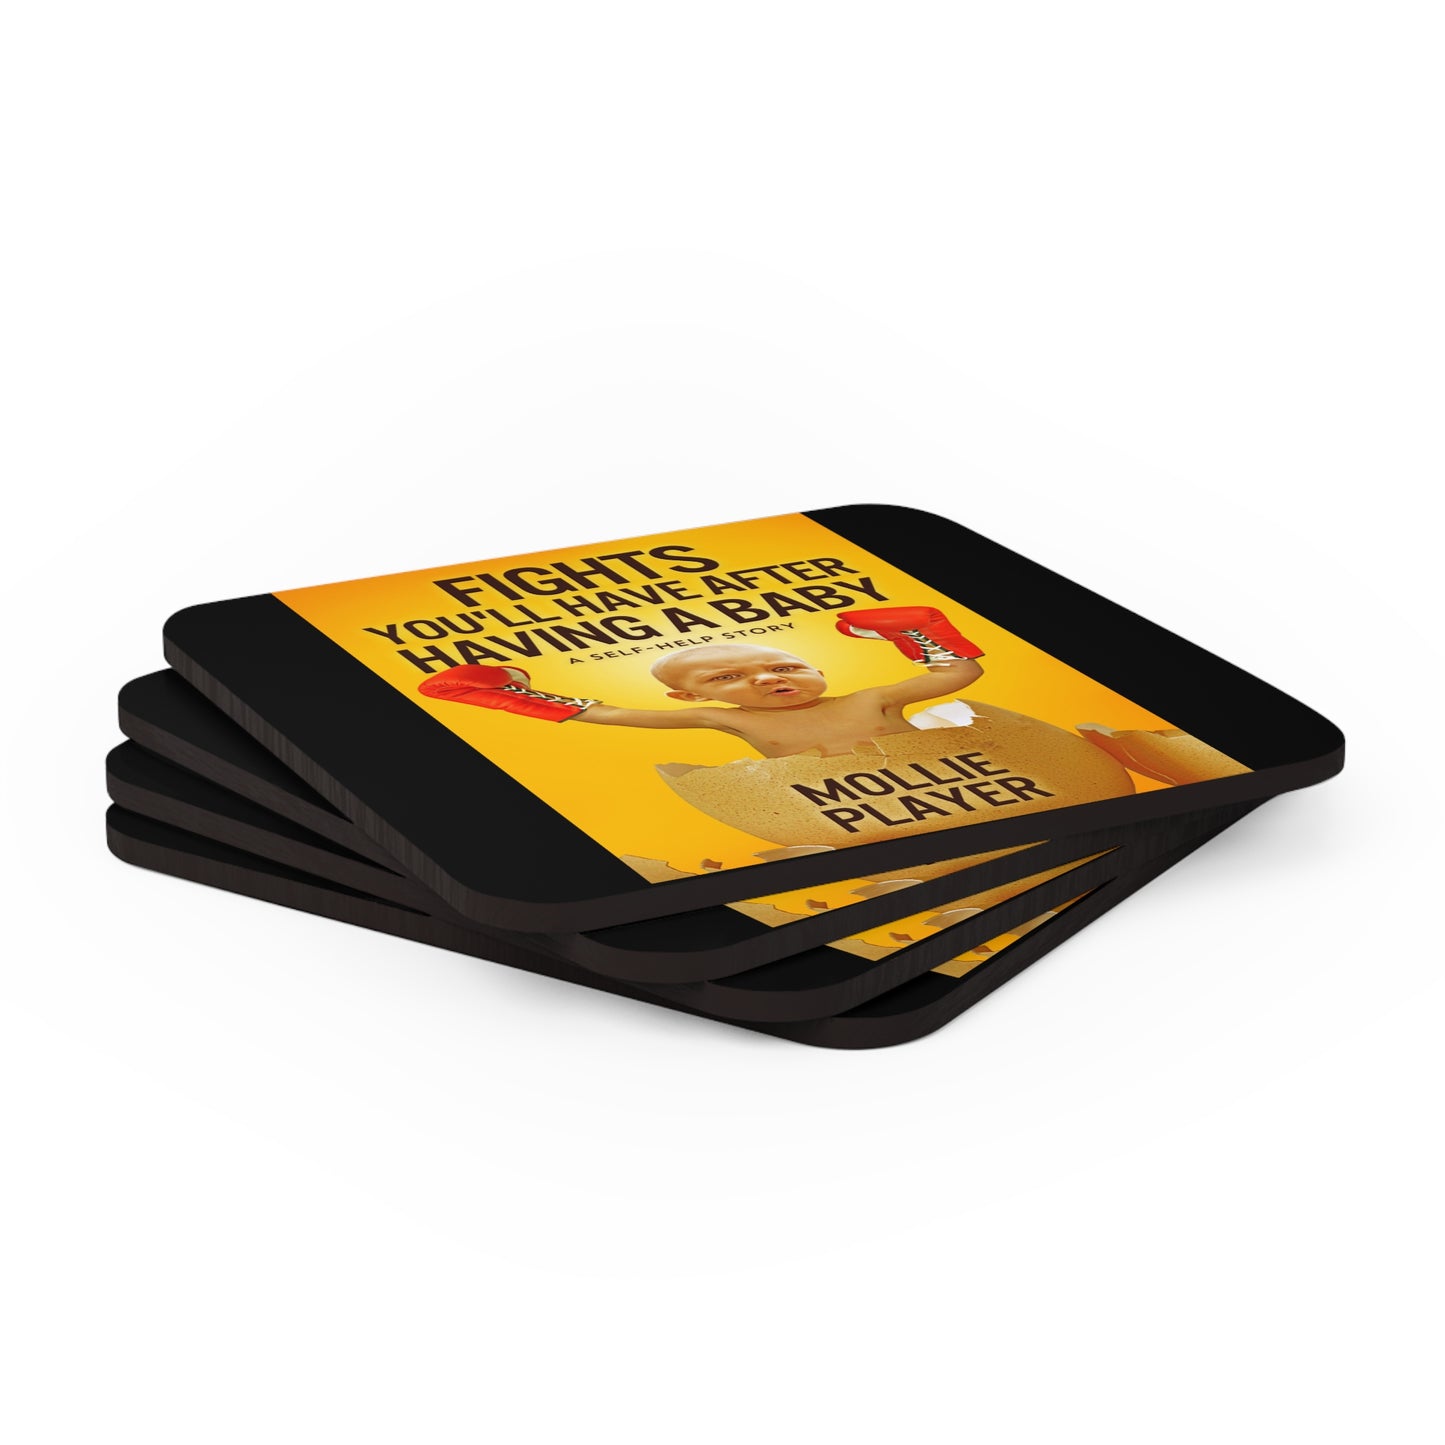 Fights You'll Have After Having A Baby - Corkwood Coaster Set